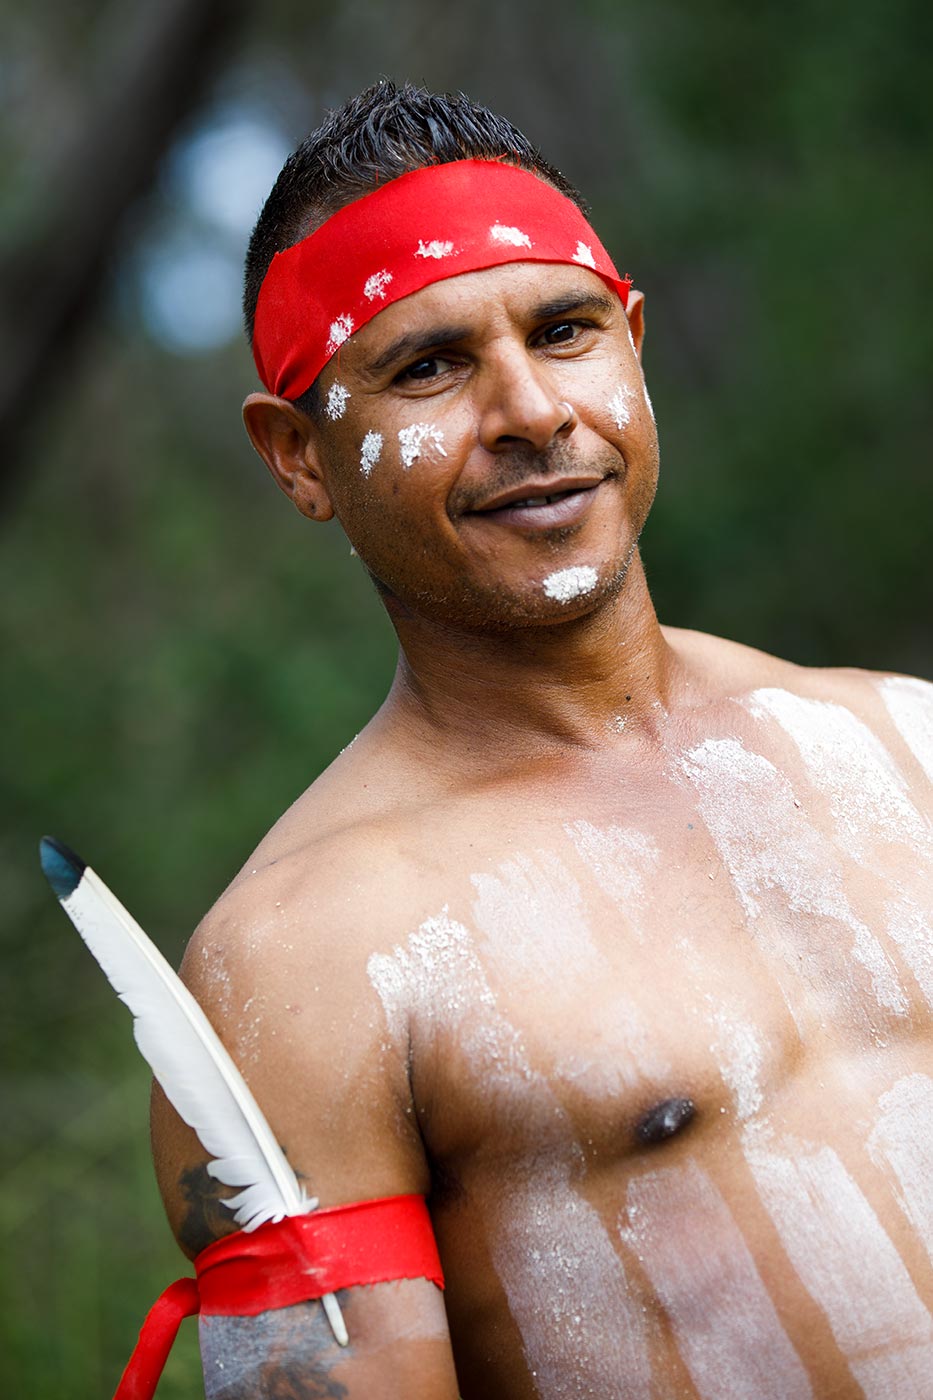 Portrait of a man with white face paint and a red bandana around his head. - click to view larger image